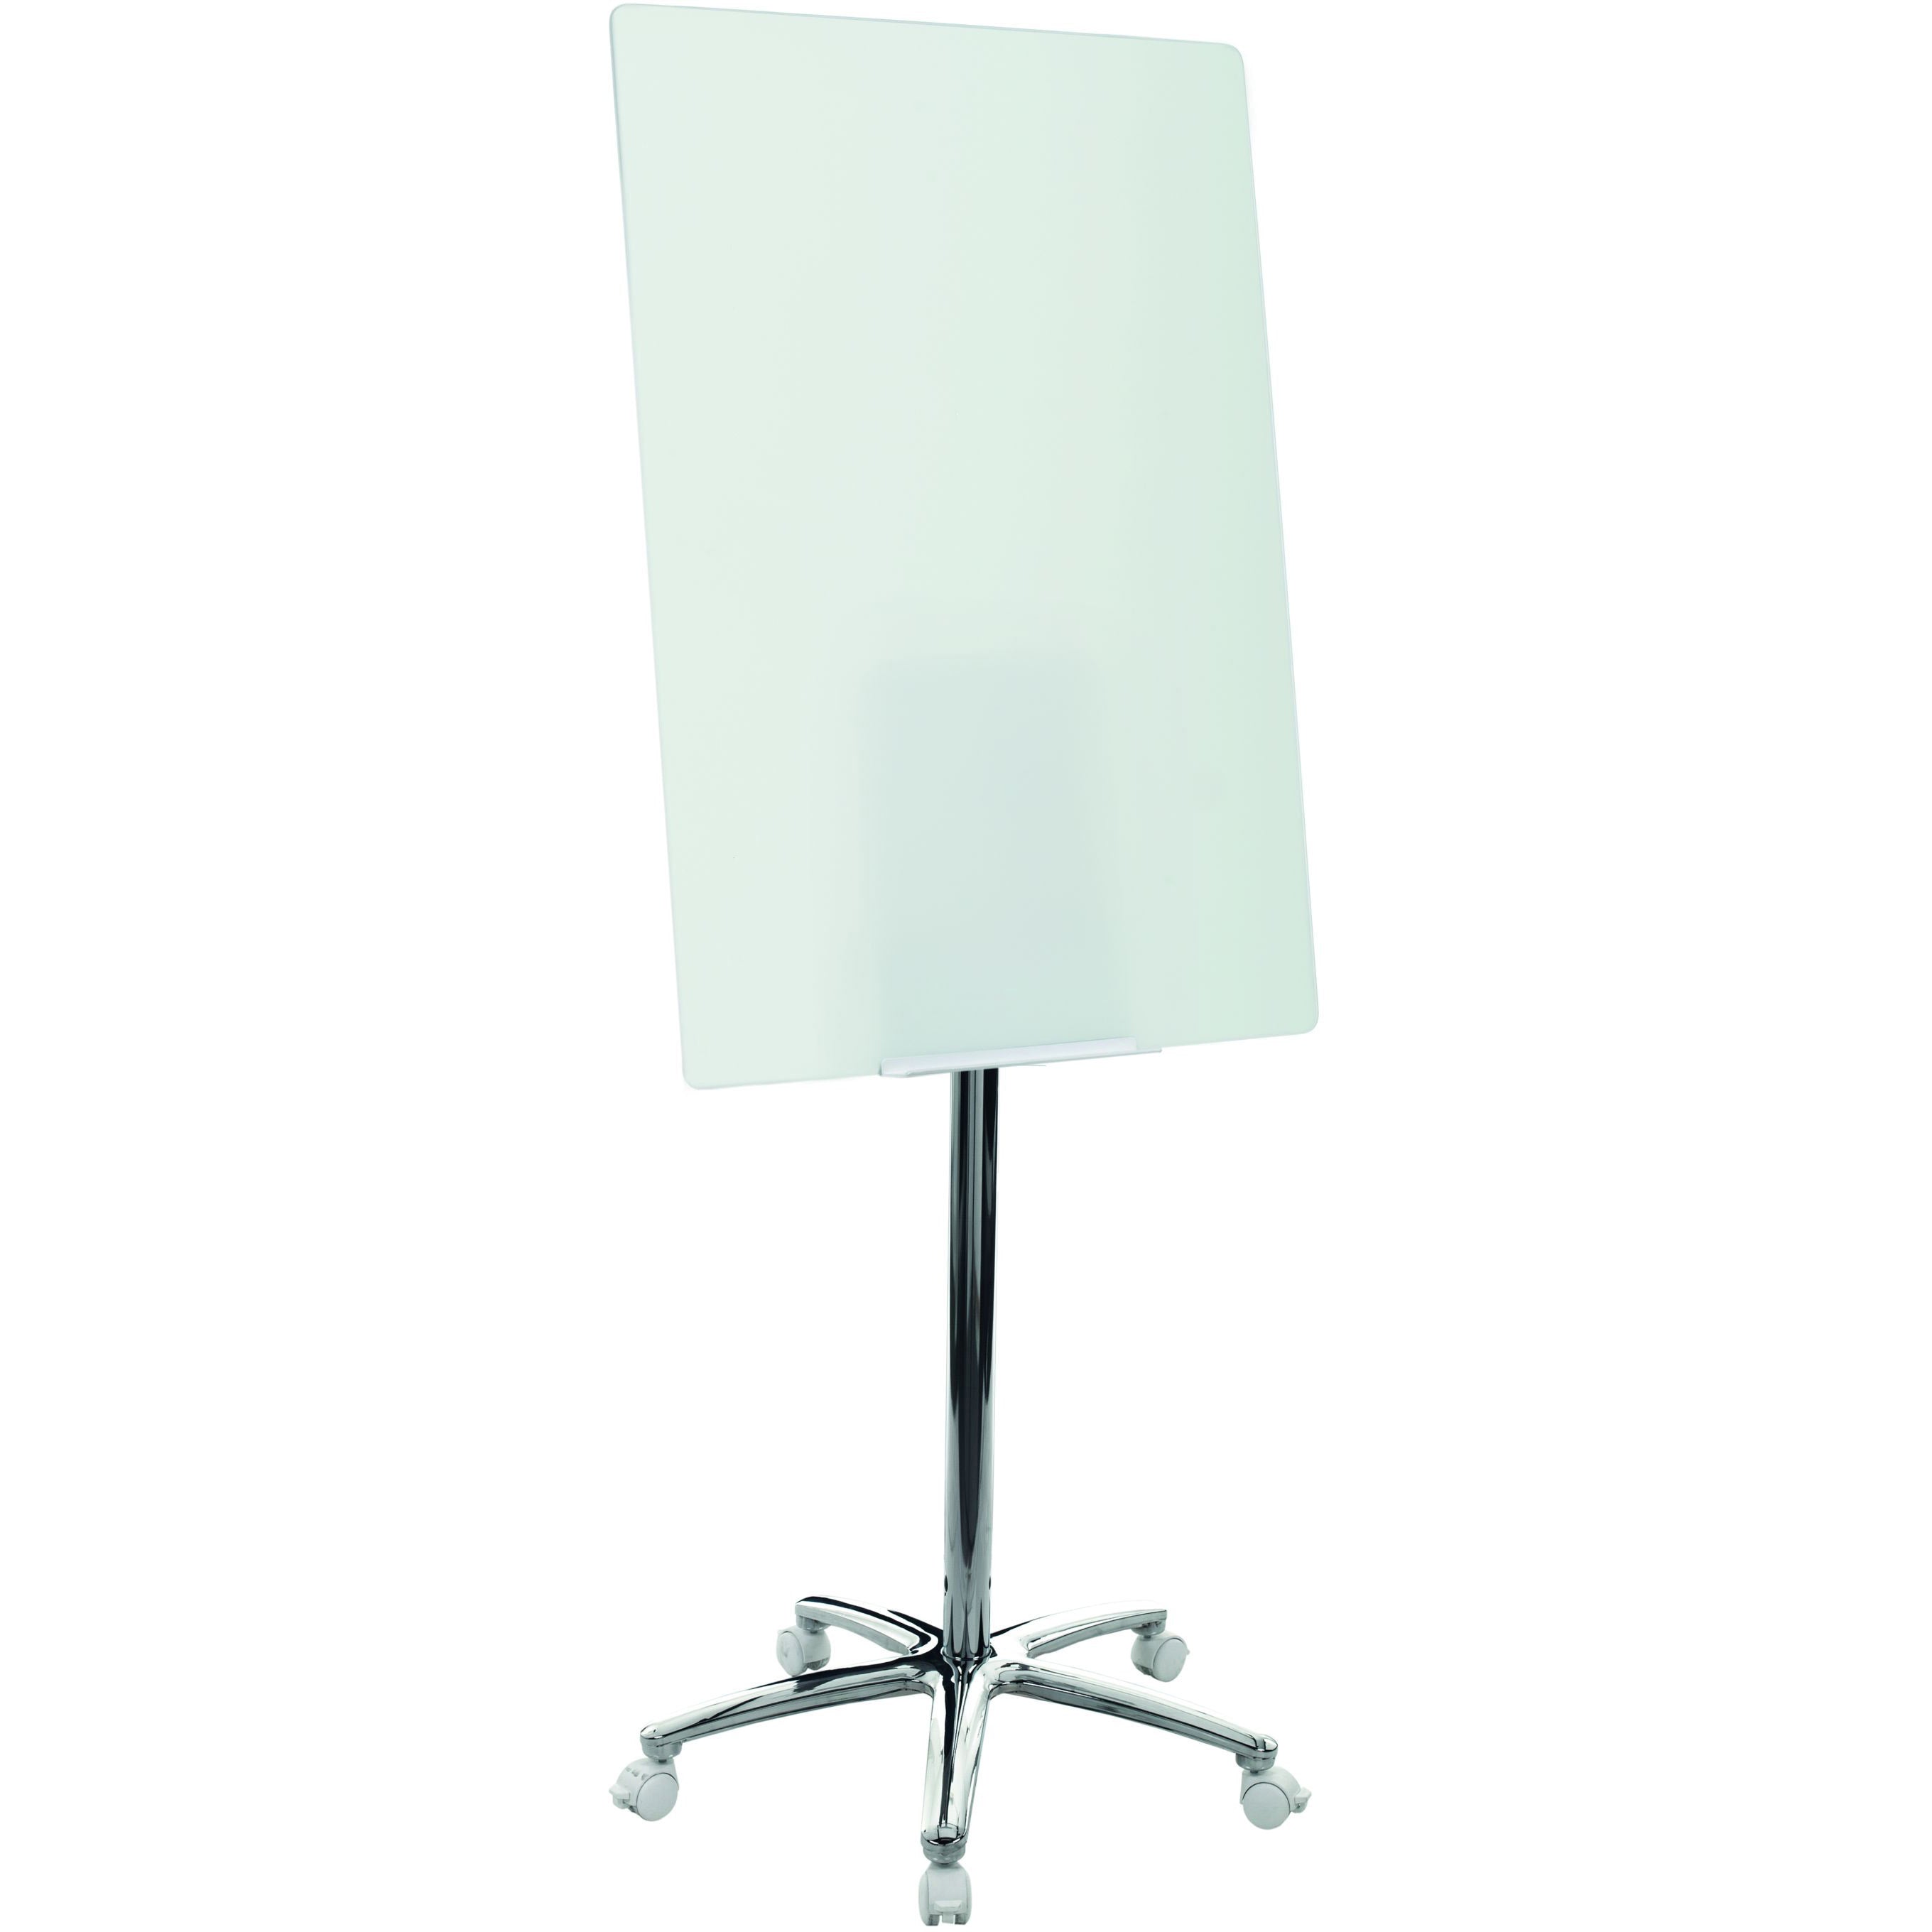 GEA4850126 Mobile Glass Dry Erase Presentation White Board Easel Stand on Wheels, 27" x 39" by MasterVision